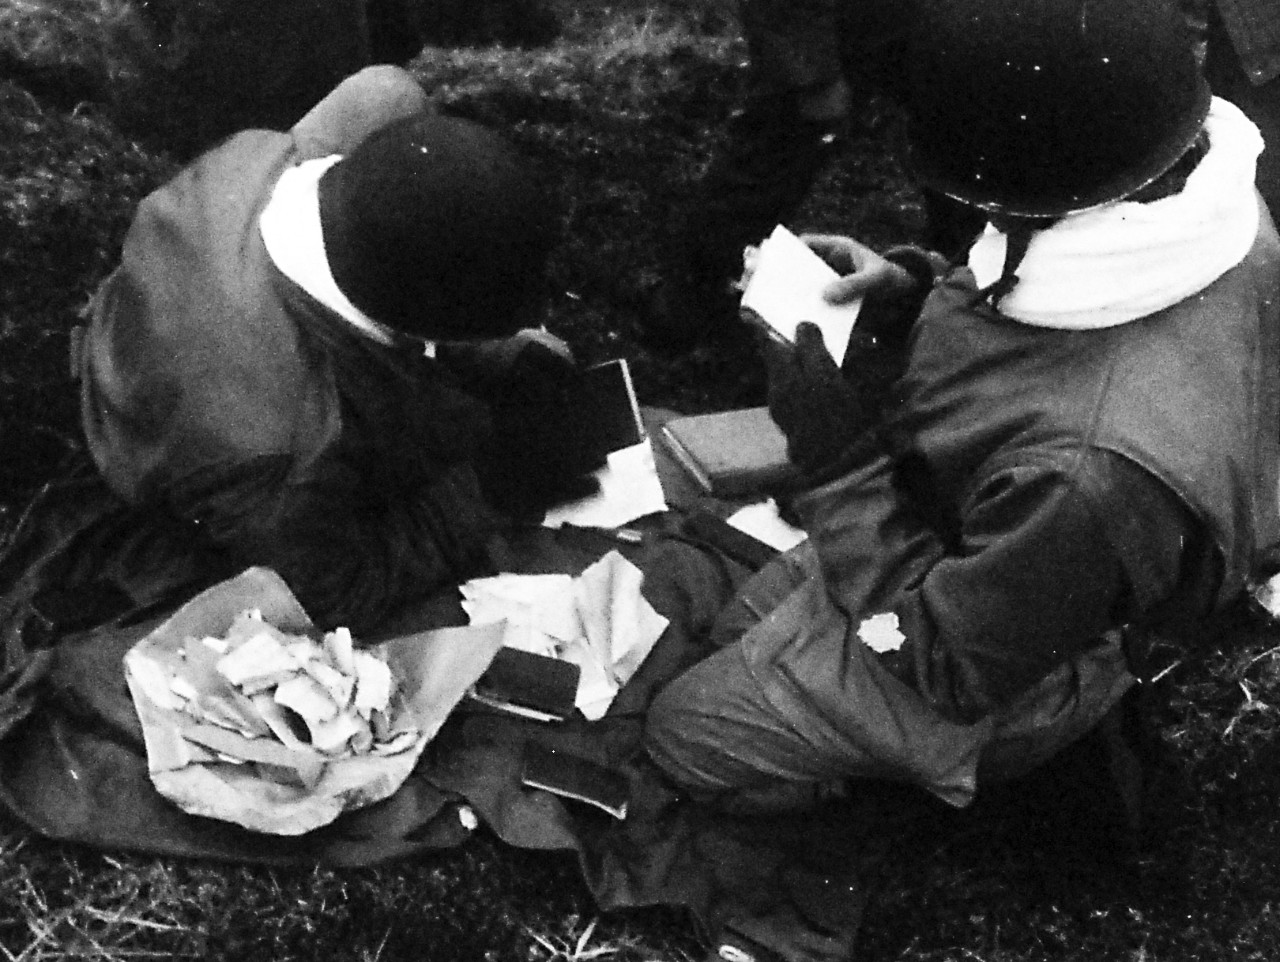 80-G-50942:    Aleutian Islands Campaign, June 1942 - August 1943.  Battle for Attu, May 1943.    U.S. Occupation of Attu, Aleutian Islands.  Intelligence men (G-2) looking over captured Japanese articles, May 13, 1943.  U.S. Navy Photograph, now in the collections of the National Archives.  (2016/05/10).